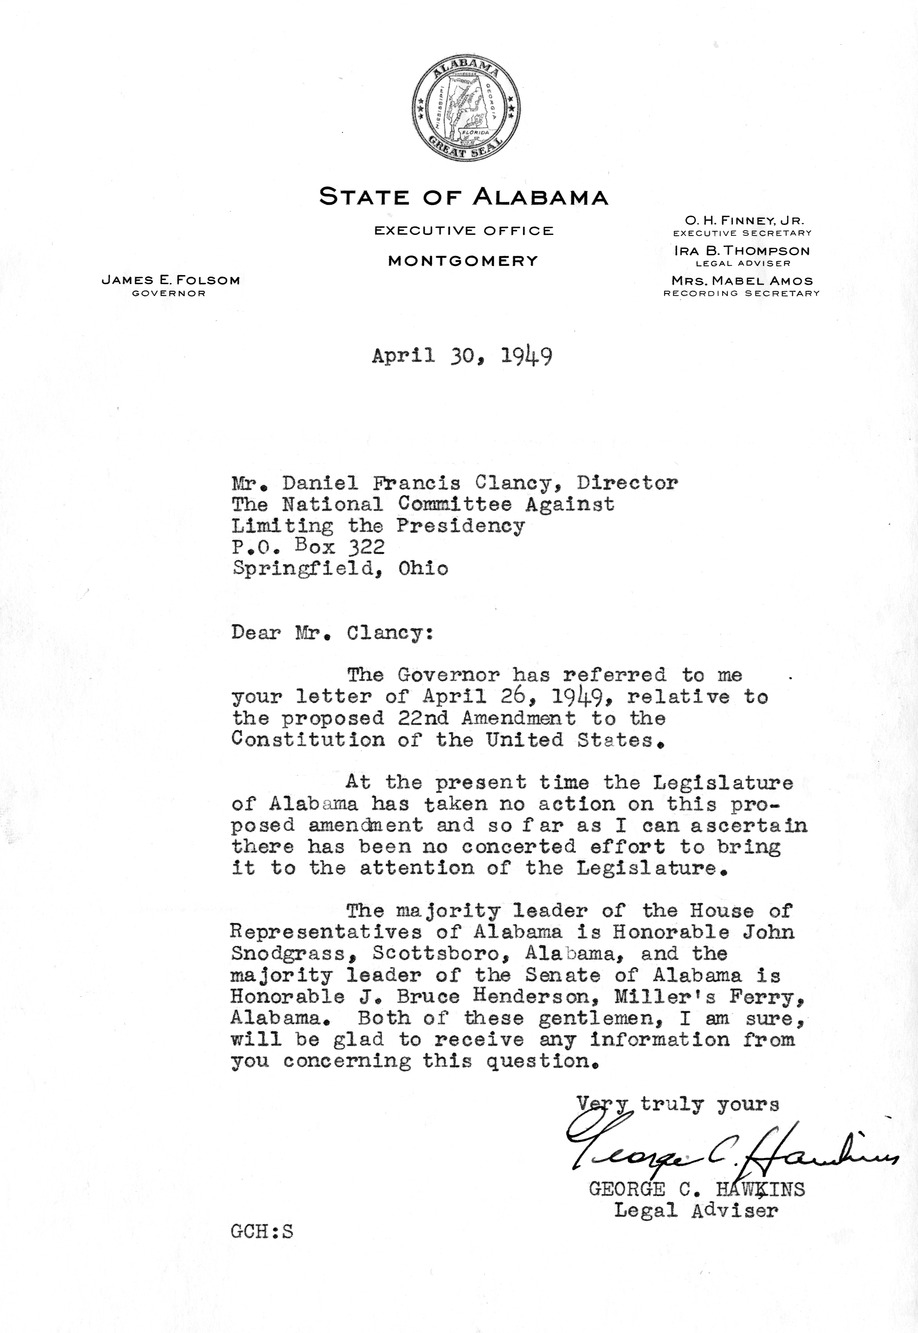 Letter from George C. Hawkins to Daniel F. Clancy